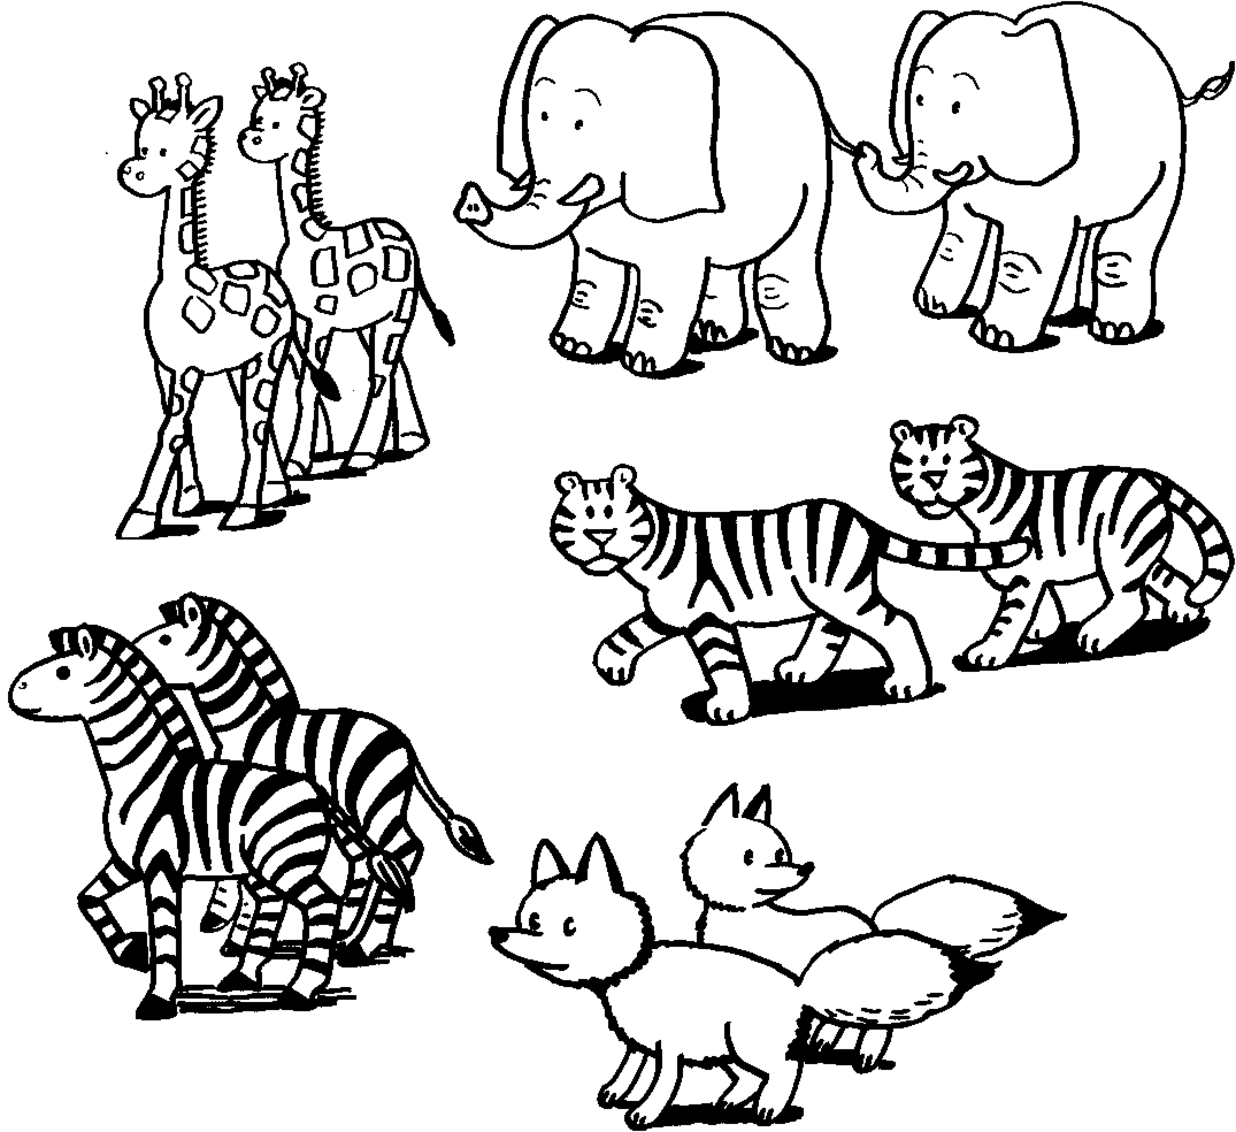 Animals Coloring Pages Realistic Coloring Pages Coloring Wallpapers Download Free Images Wallpaper [coloring436.blogspot.com]